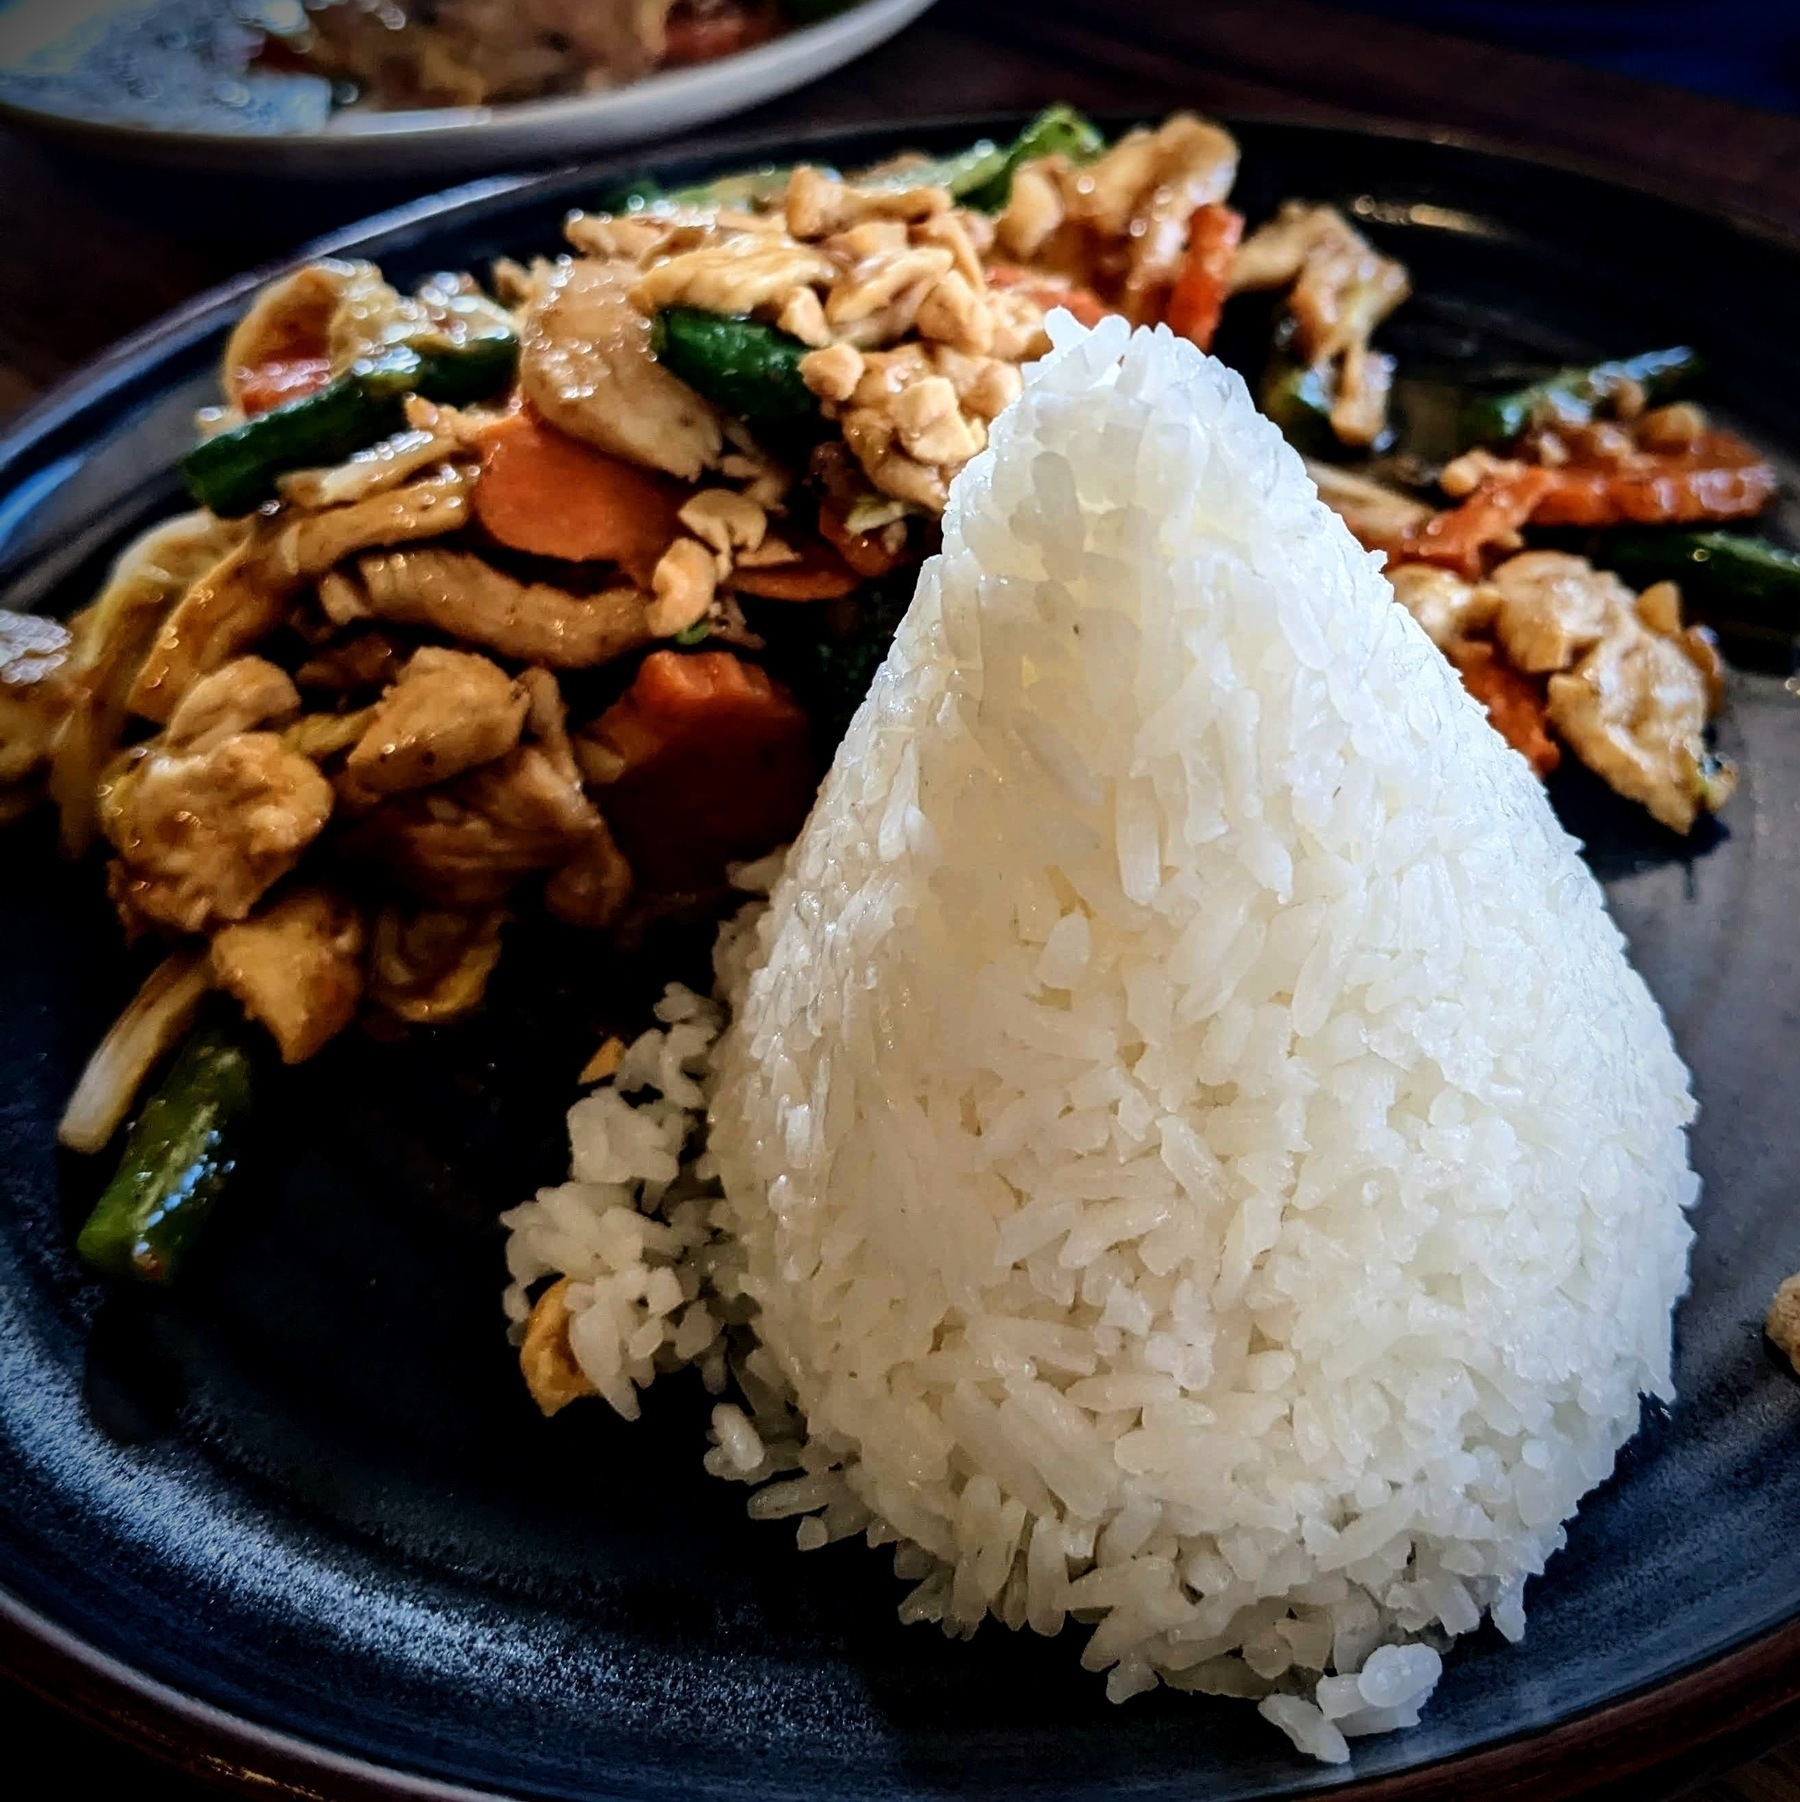 plate of Thai food featuring a pyramid of rice